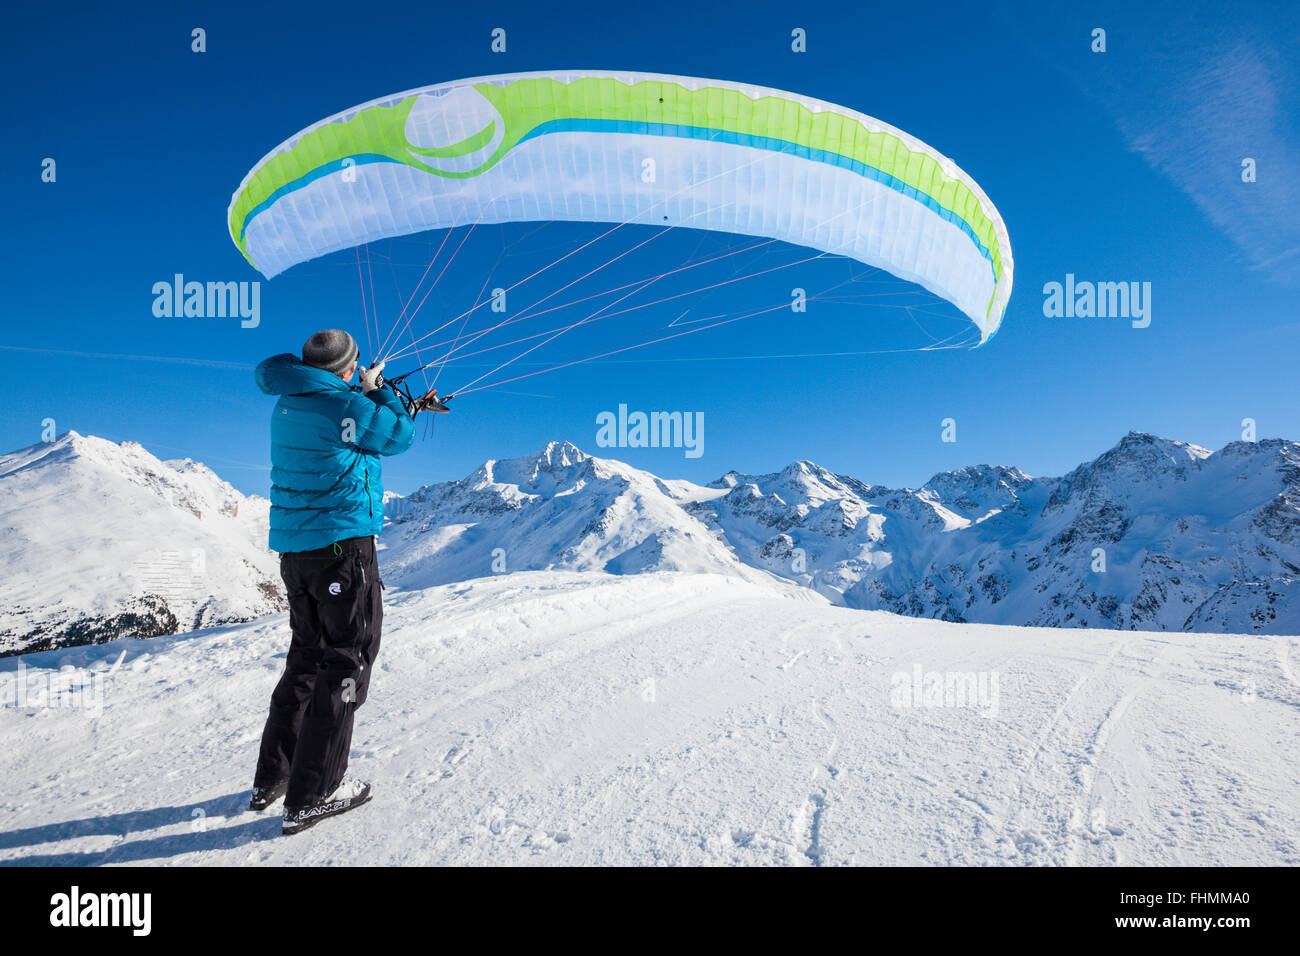 Groundhandling with the Paraglider, Sulden Skiing Area, South Tyrol, Italy Stock Photo